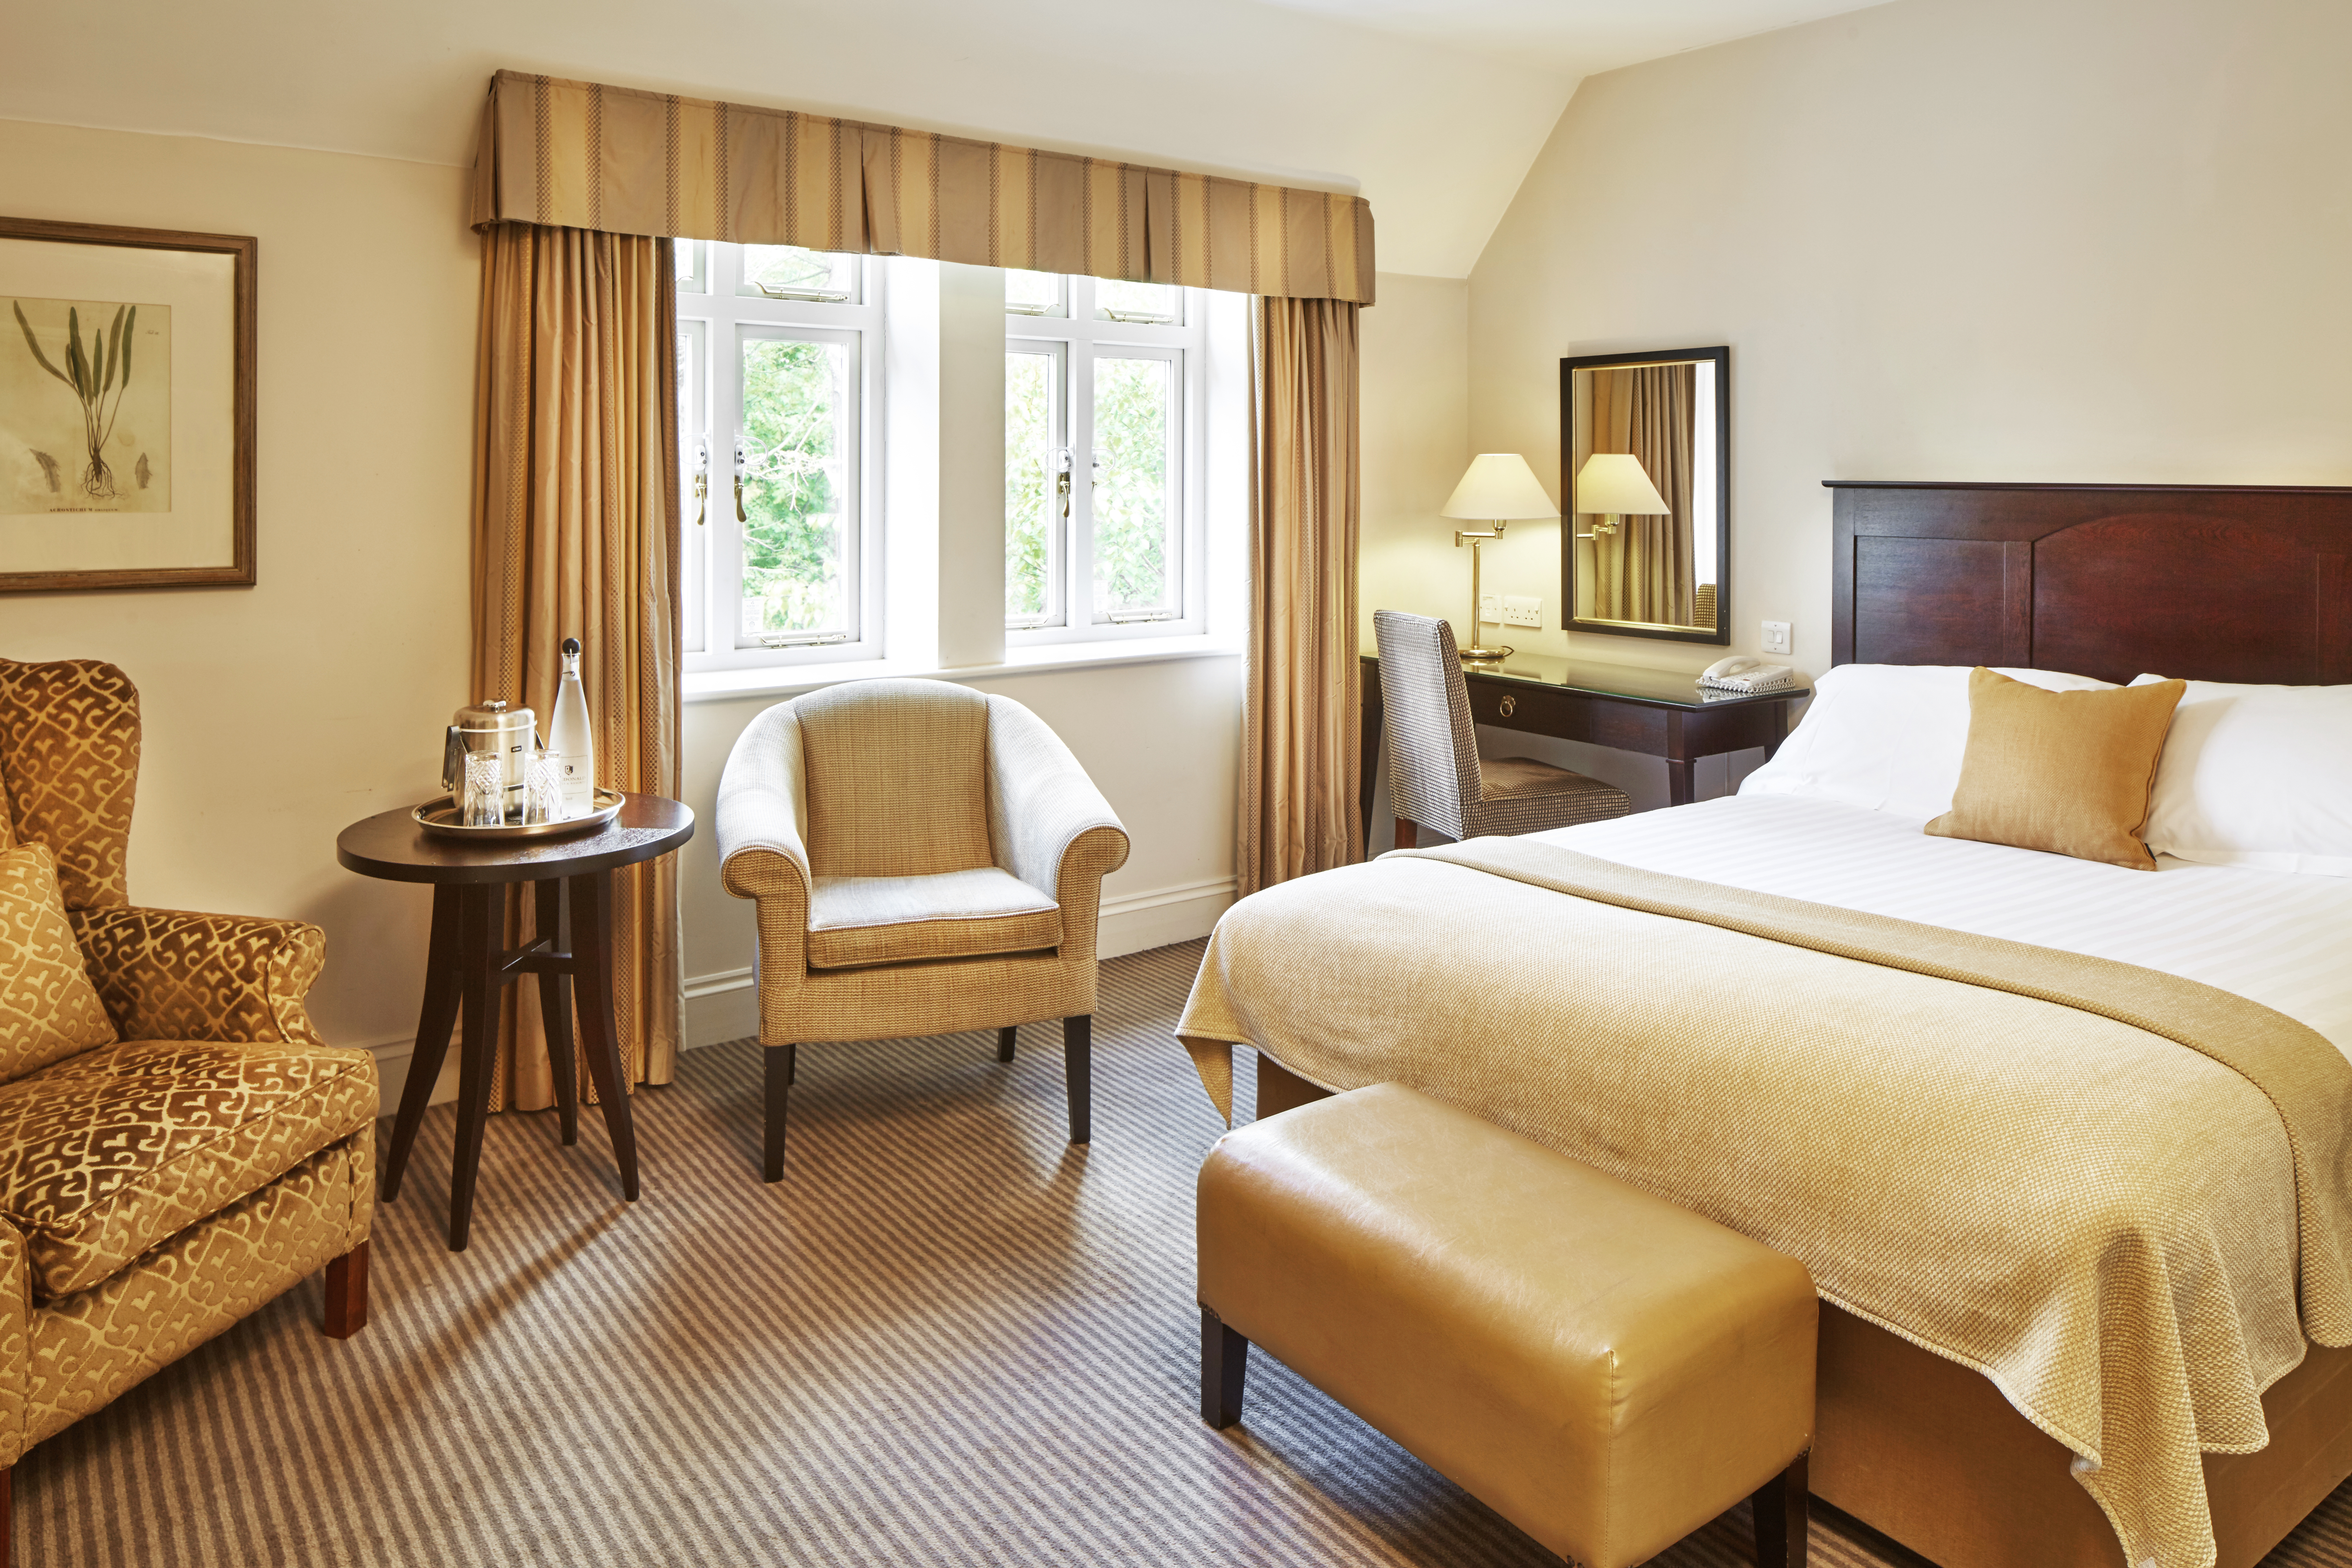 1 Night The Essential Spa Break For Two, Macdonald Frimley Hall Hotel